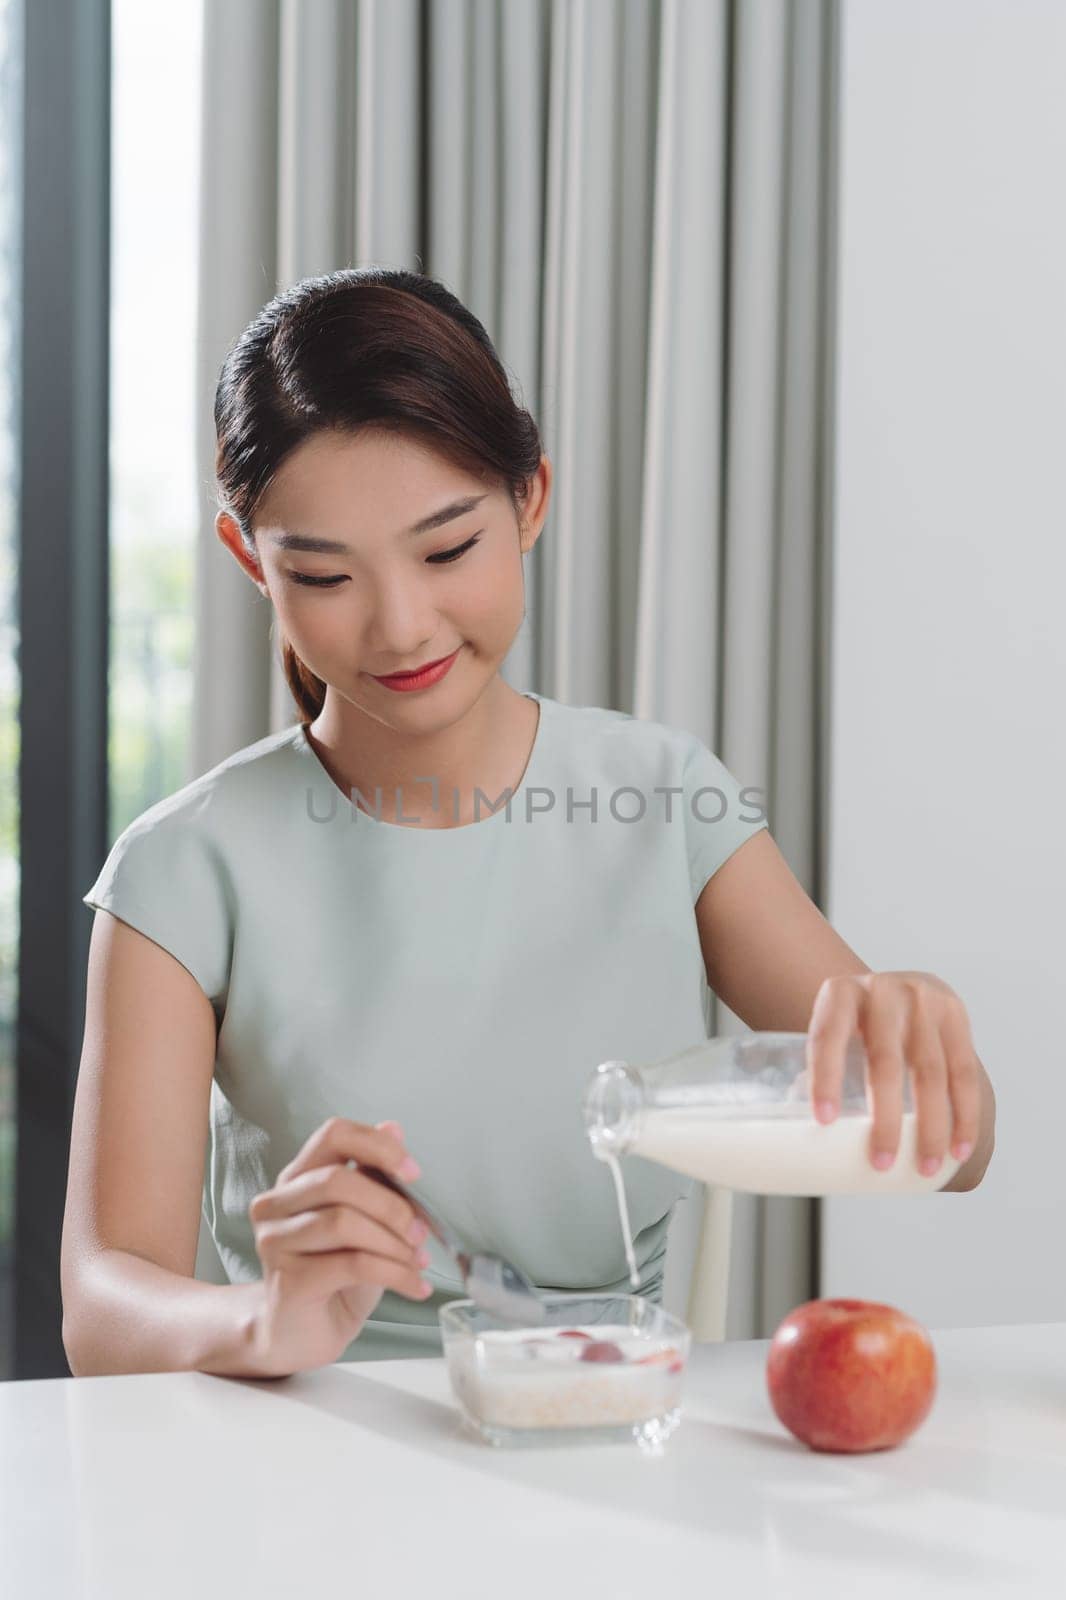 Smiling young woman pouring milk into a bowl while sitting and having breakfast  by makidotvn